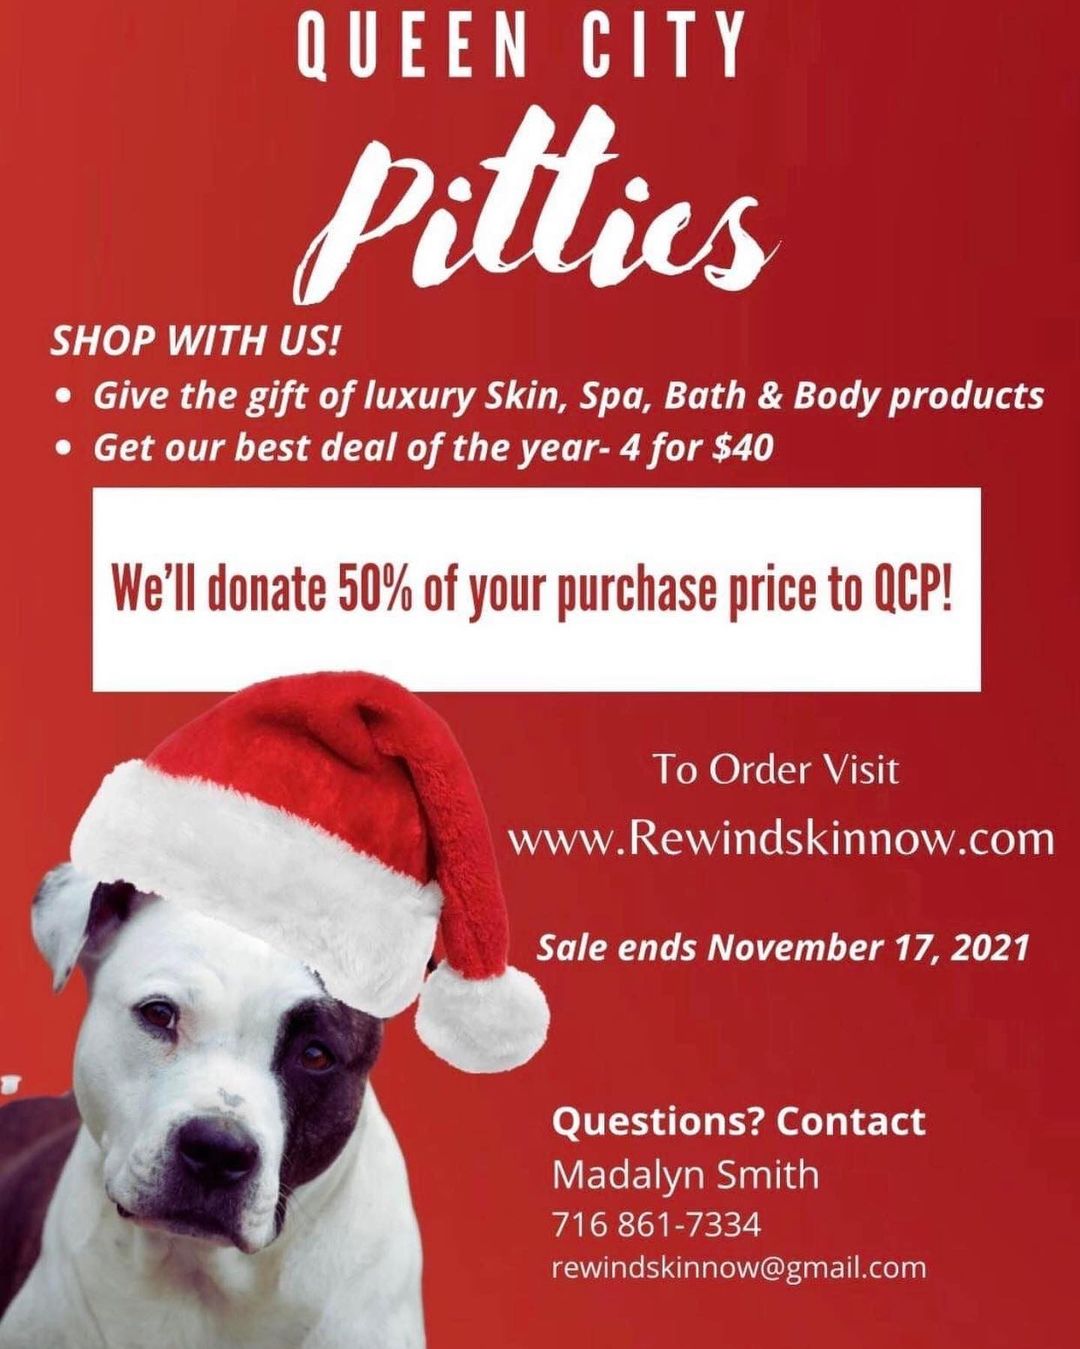 If Beer Blasts, Football Squares or Raffles aren't your thing, but you'd still like to donate, we have something else you might be interested in!! 
One of our awesome supporters is having a Skin Care Fundraiser for us!! 

Give the gift of luxury Skin, Spa, Bath & Body products this Holiday Season!! 50% of your purchase is donated back to QCP!! There is literally something for everyone! 

To view products and place an order, please visit: https://agellumlife.com/msmith